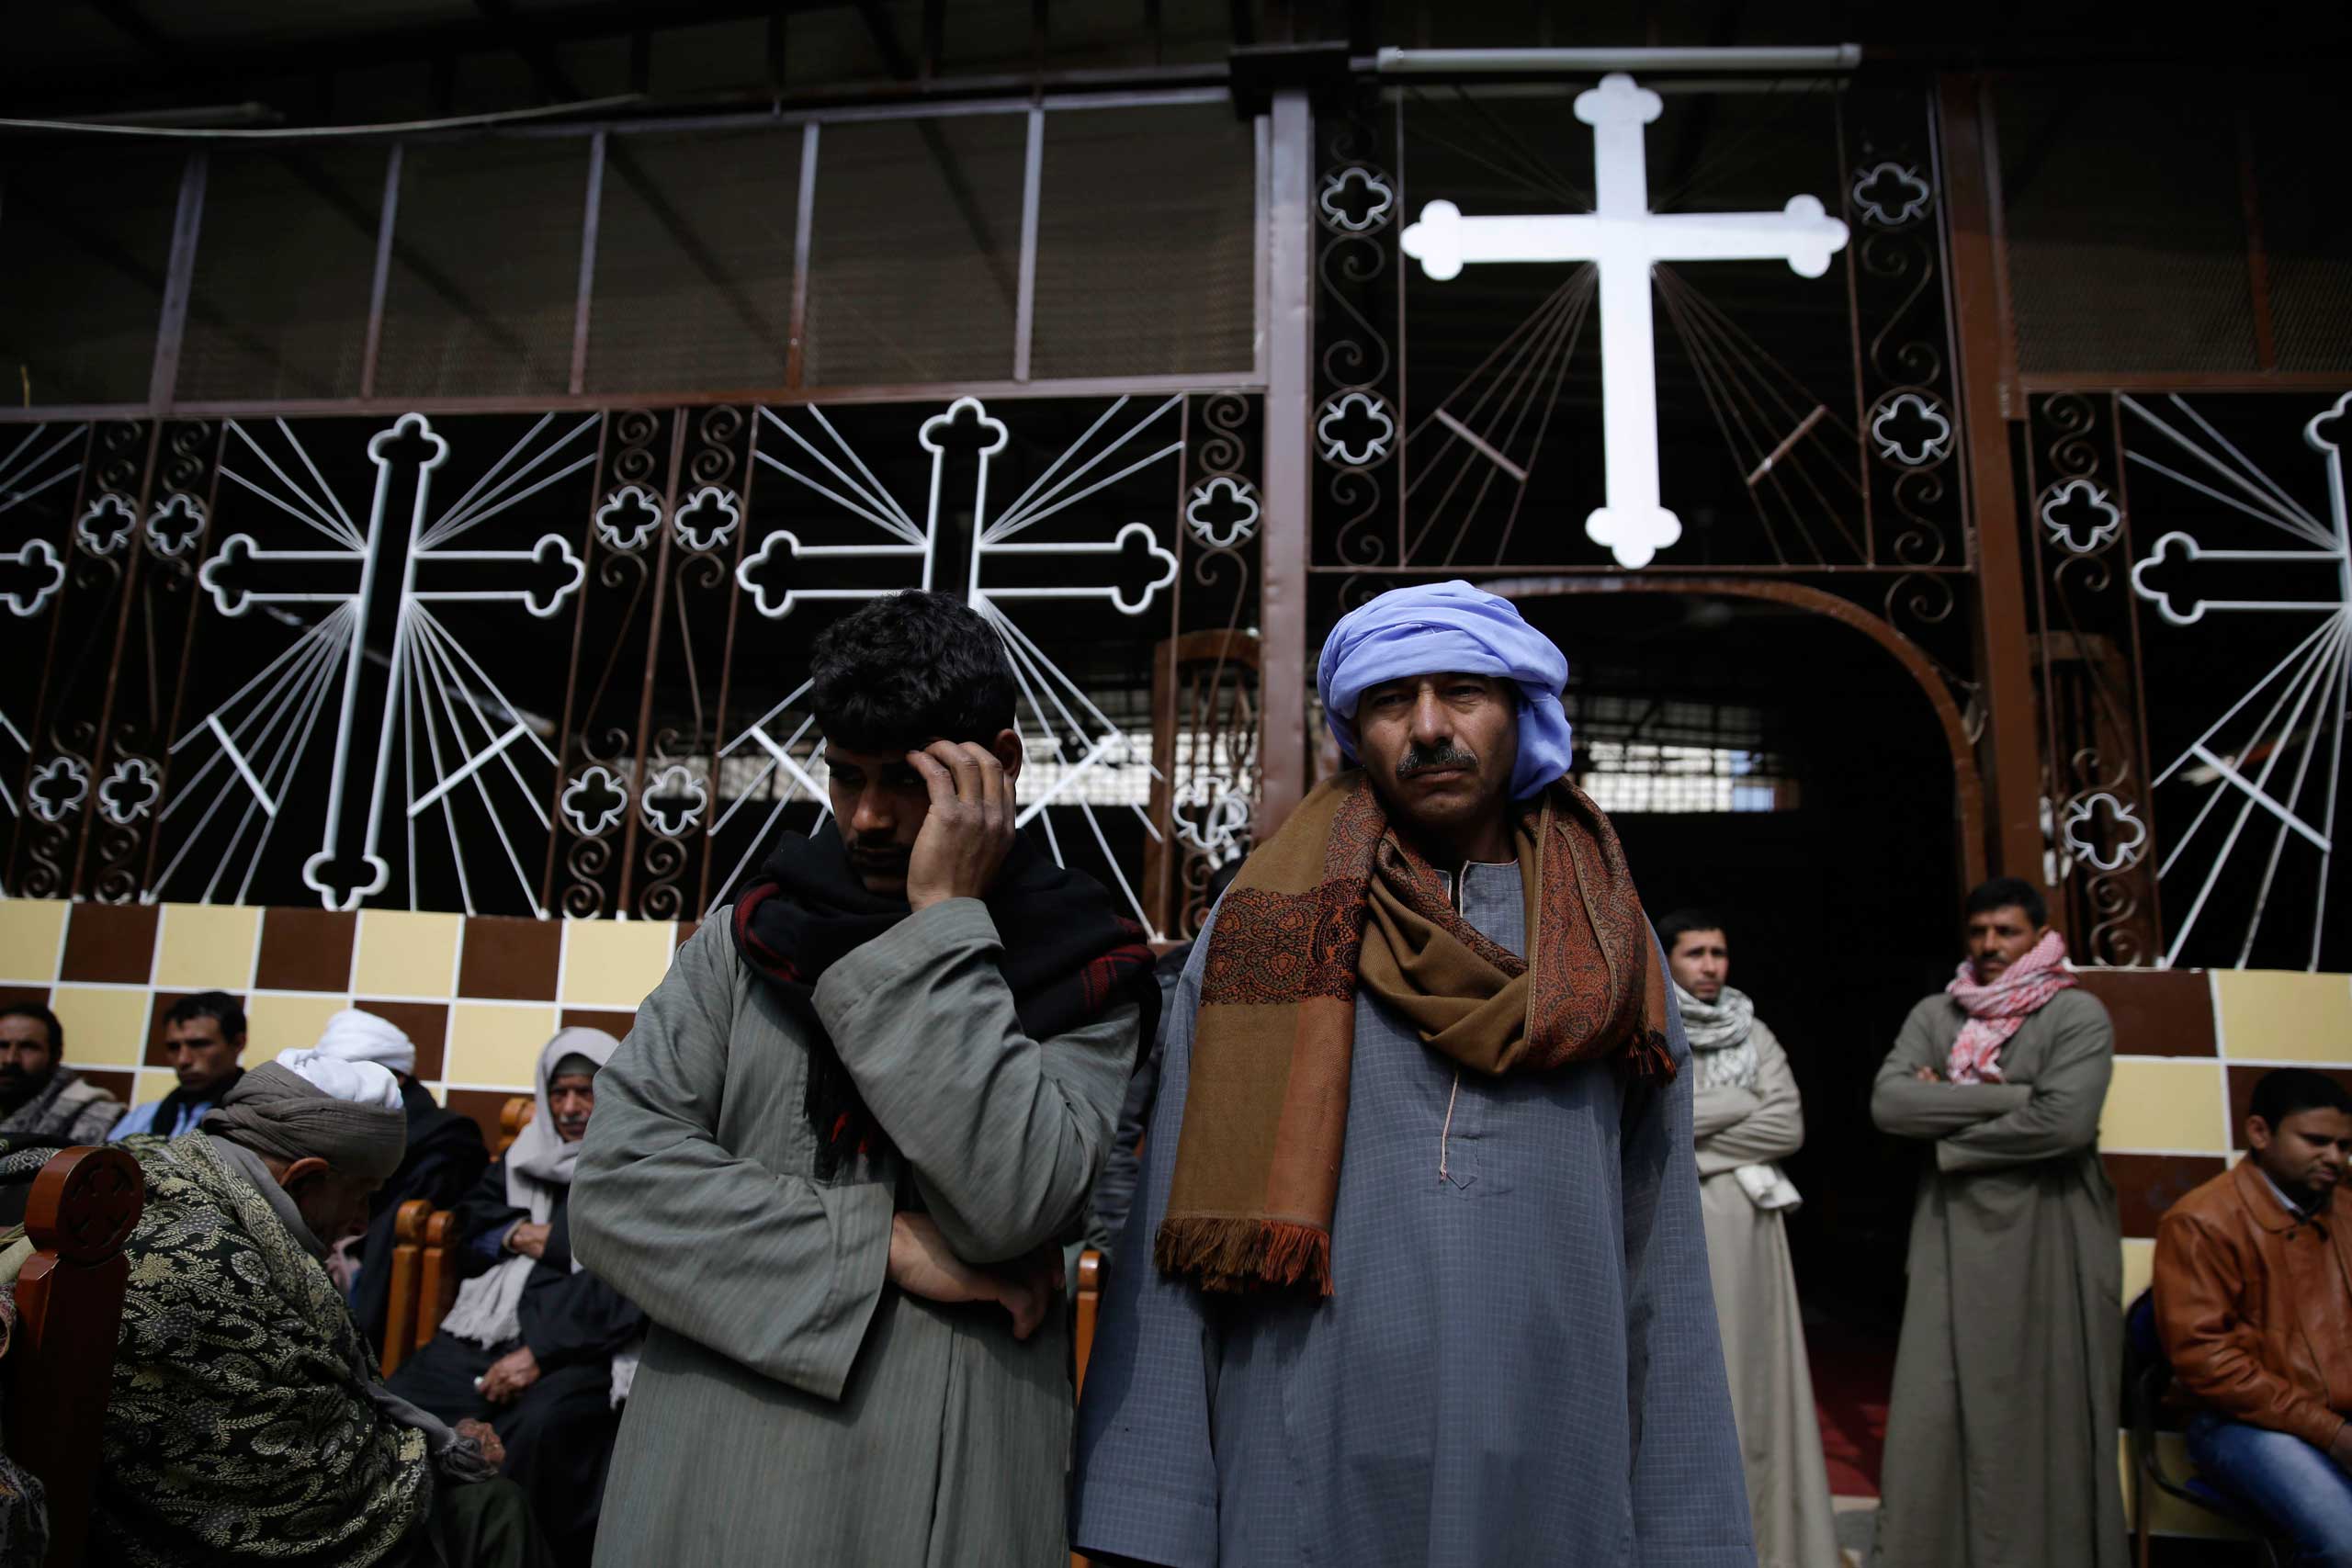 Men mourn over the Egyptian Coptic Christians who were captured in Libya and killed by militants affiliated with ISIS, at the Virgin Mary church in the village of Al-Our, near Minya, 135 miles south of Cairo, Feb. 16, 2015.